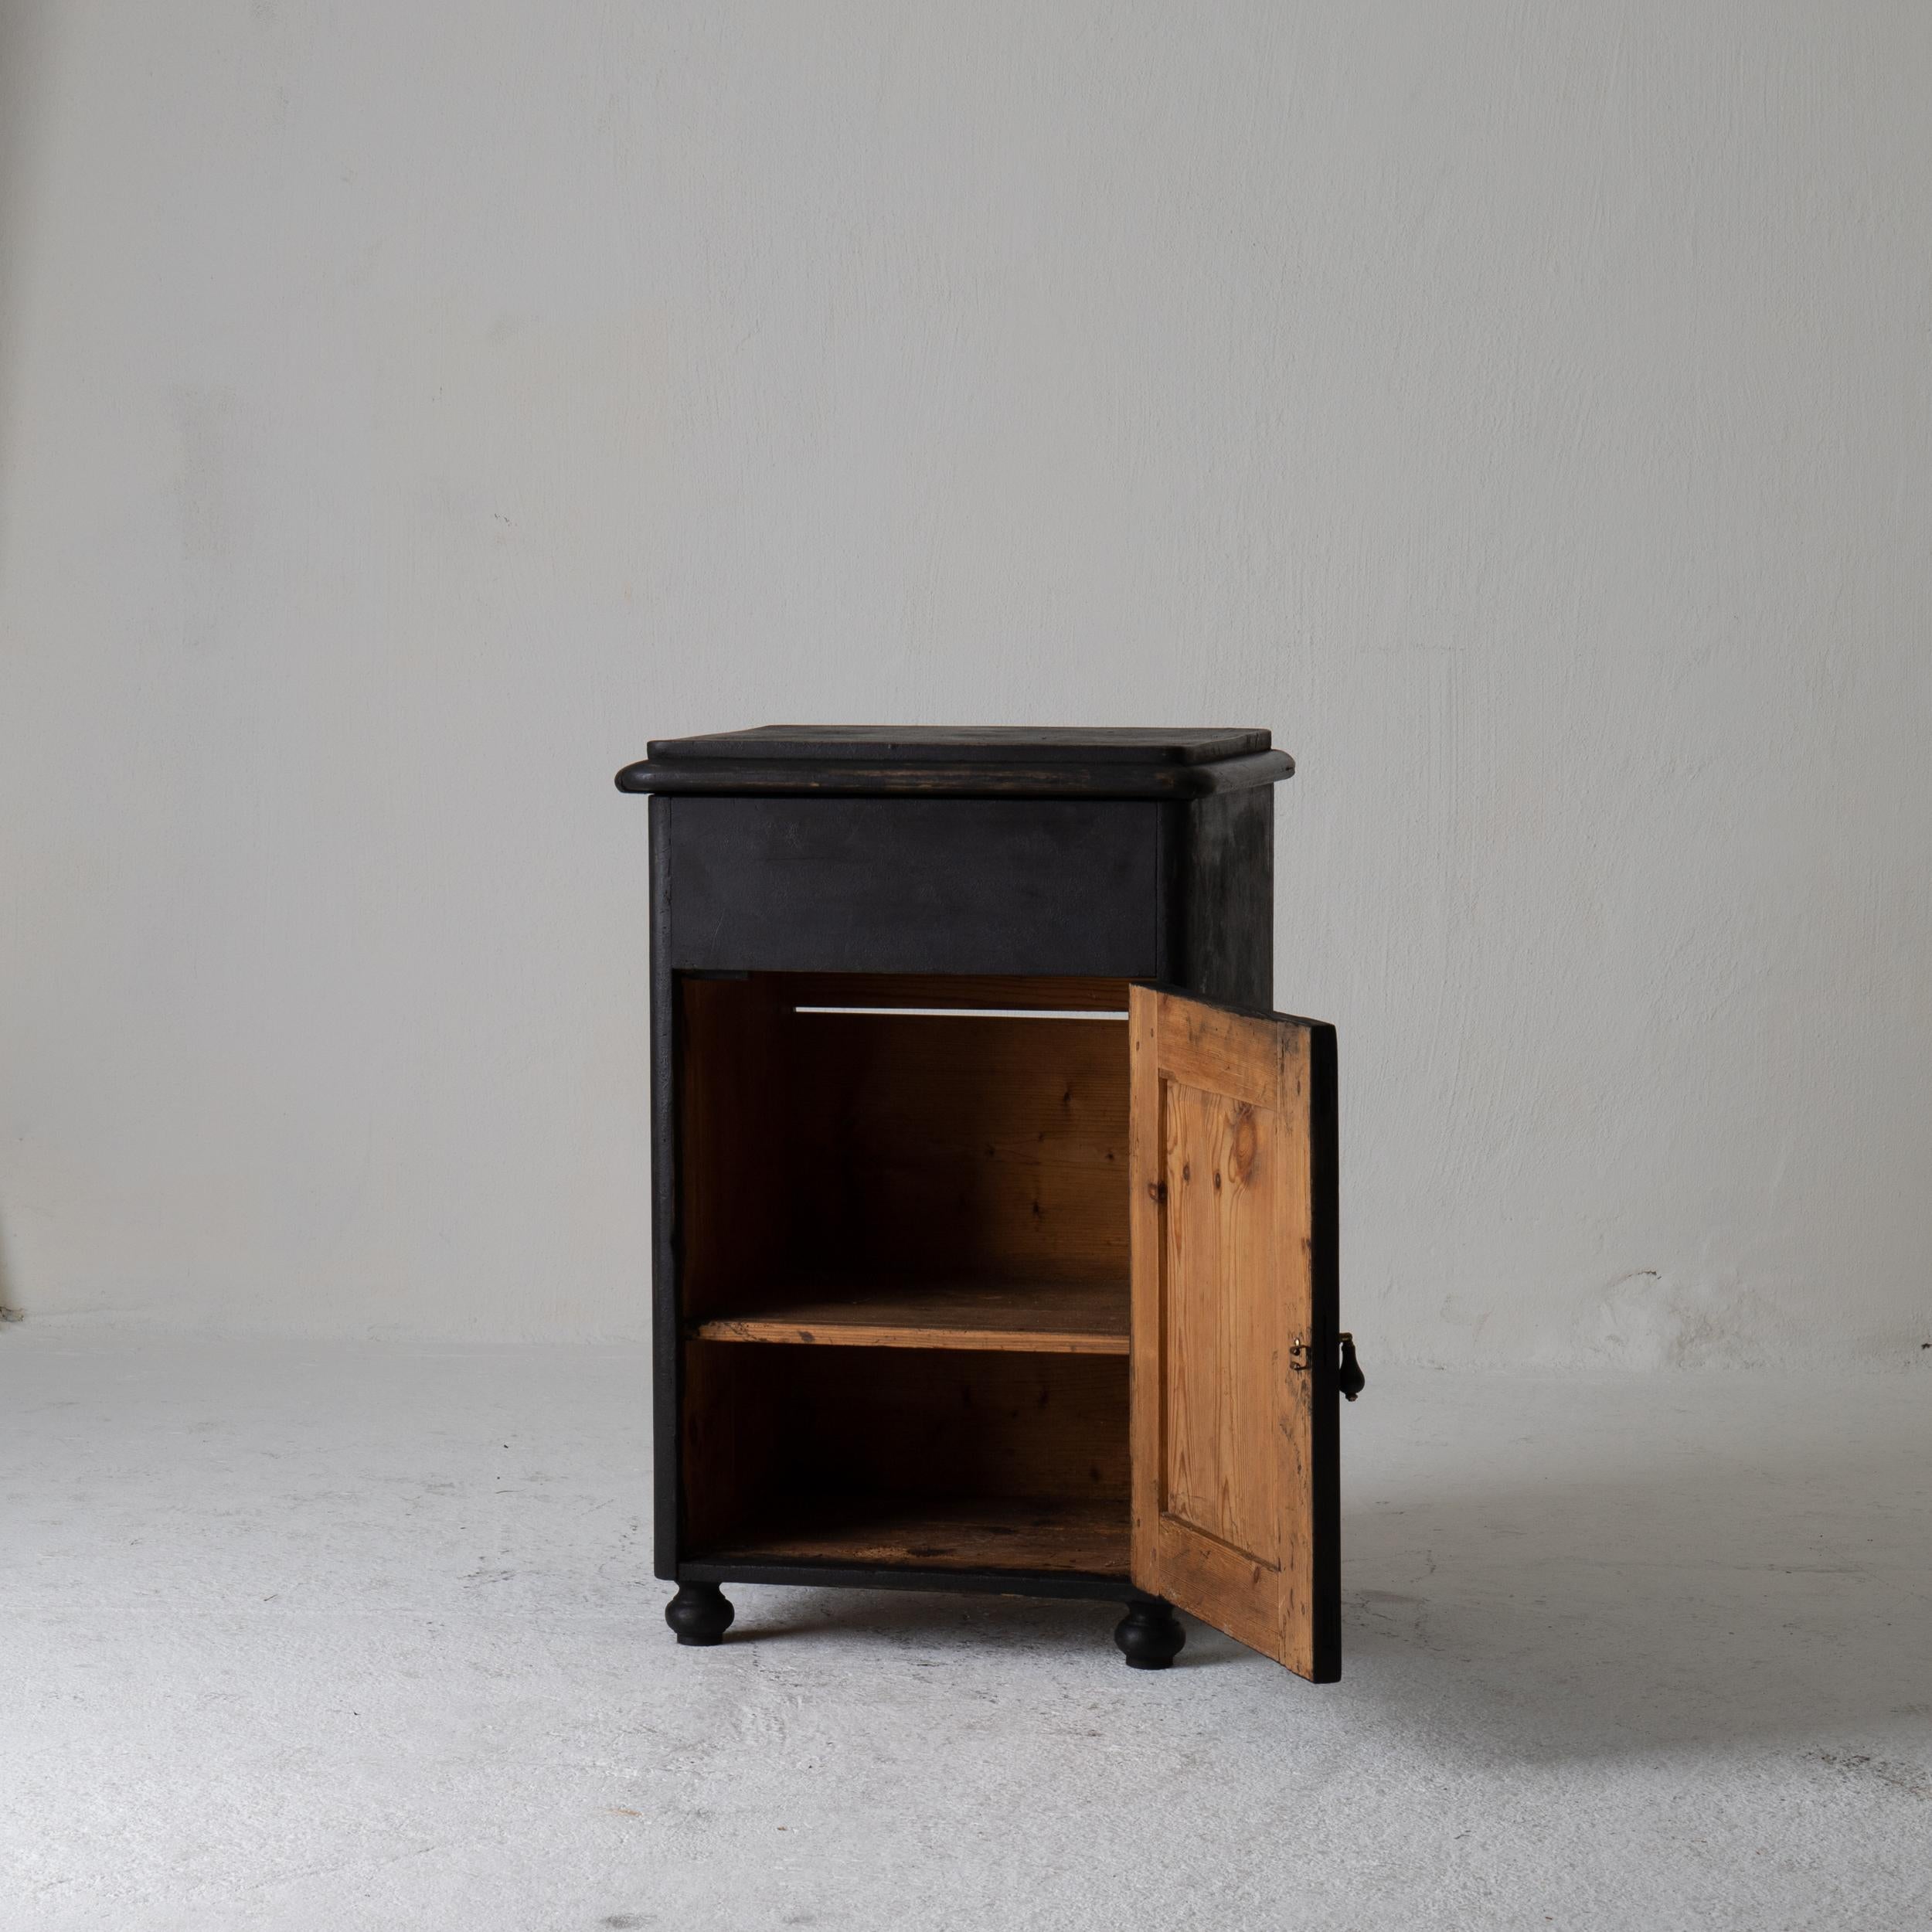 Nightstand Swedish black 19th century Sweden. A nightstand made during the 19th century in Sweden. Painted in our Laserow black. Interior with shelf. Contemporary hardware.
  
 